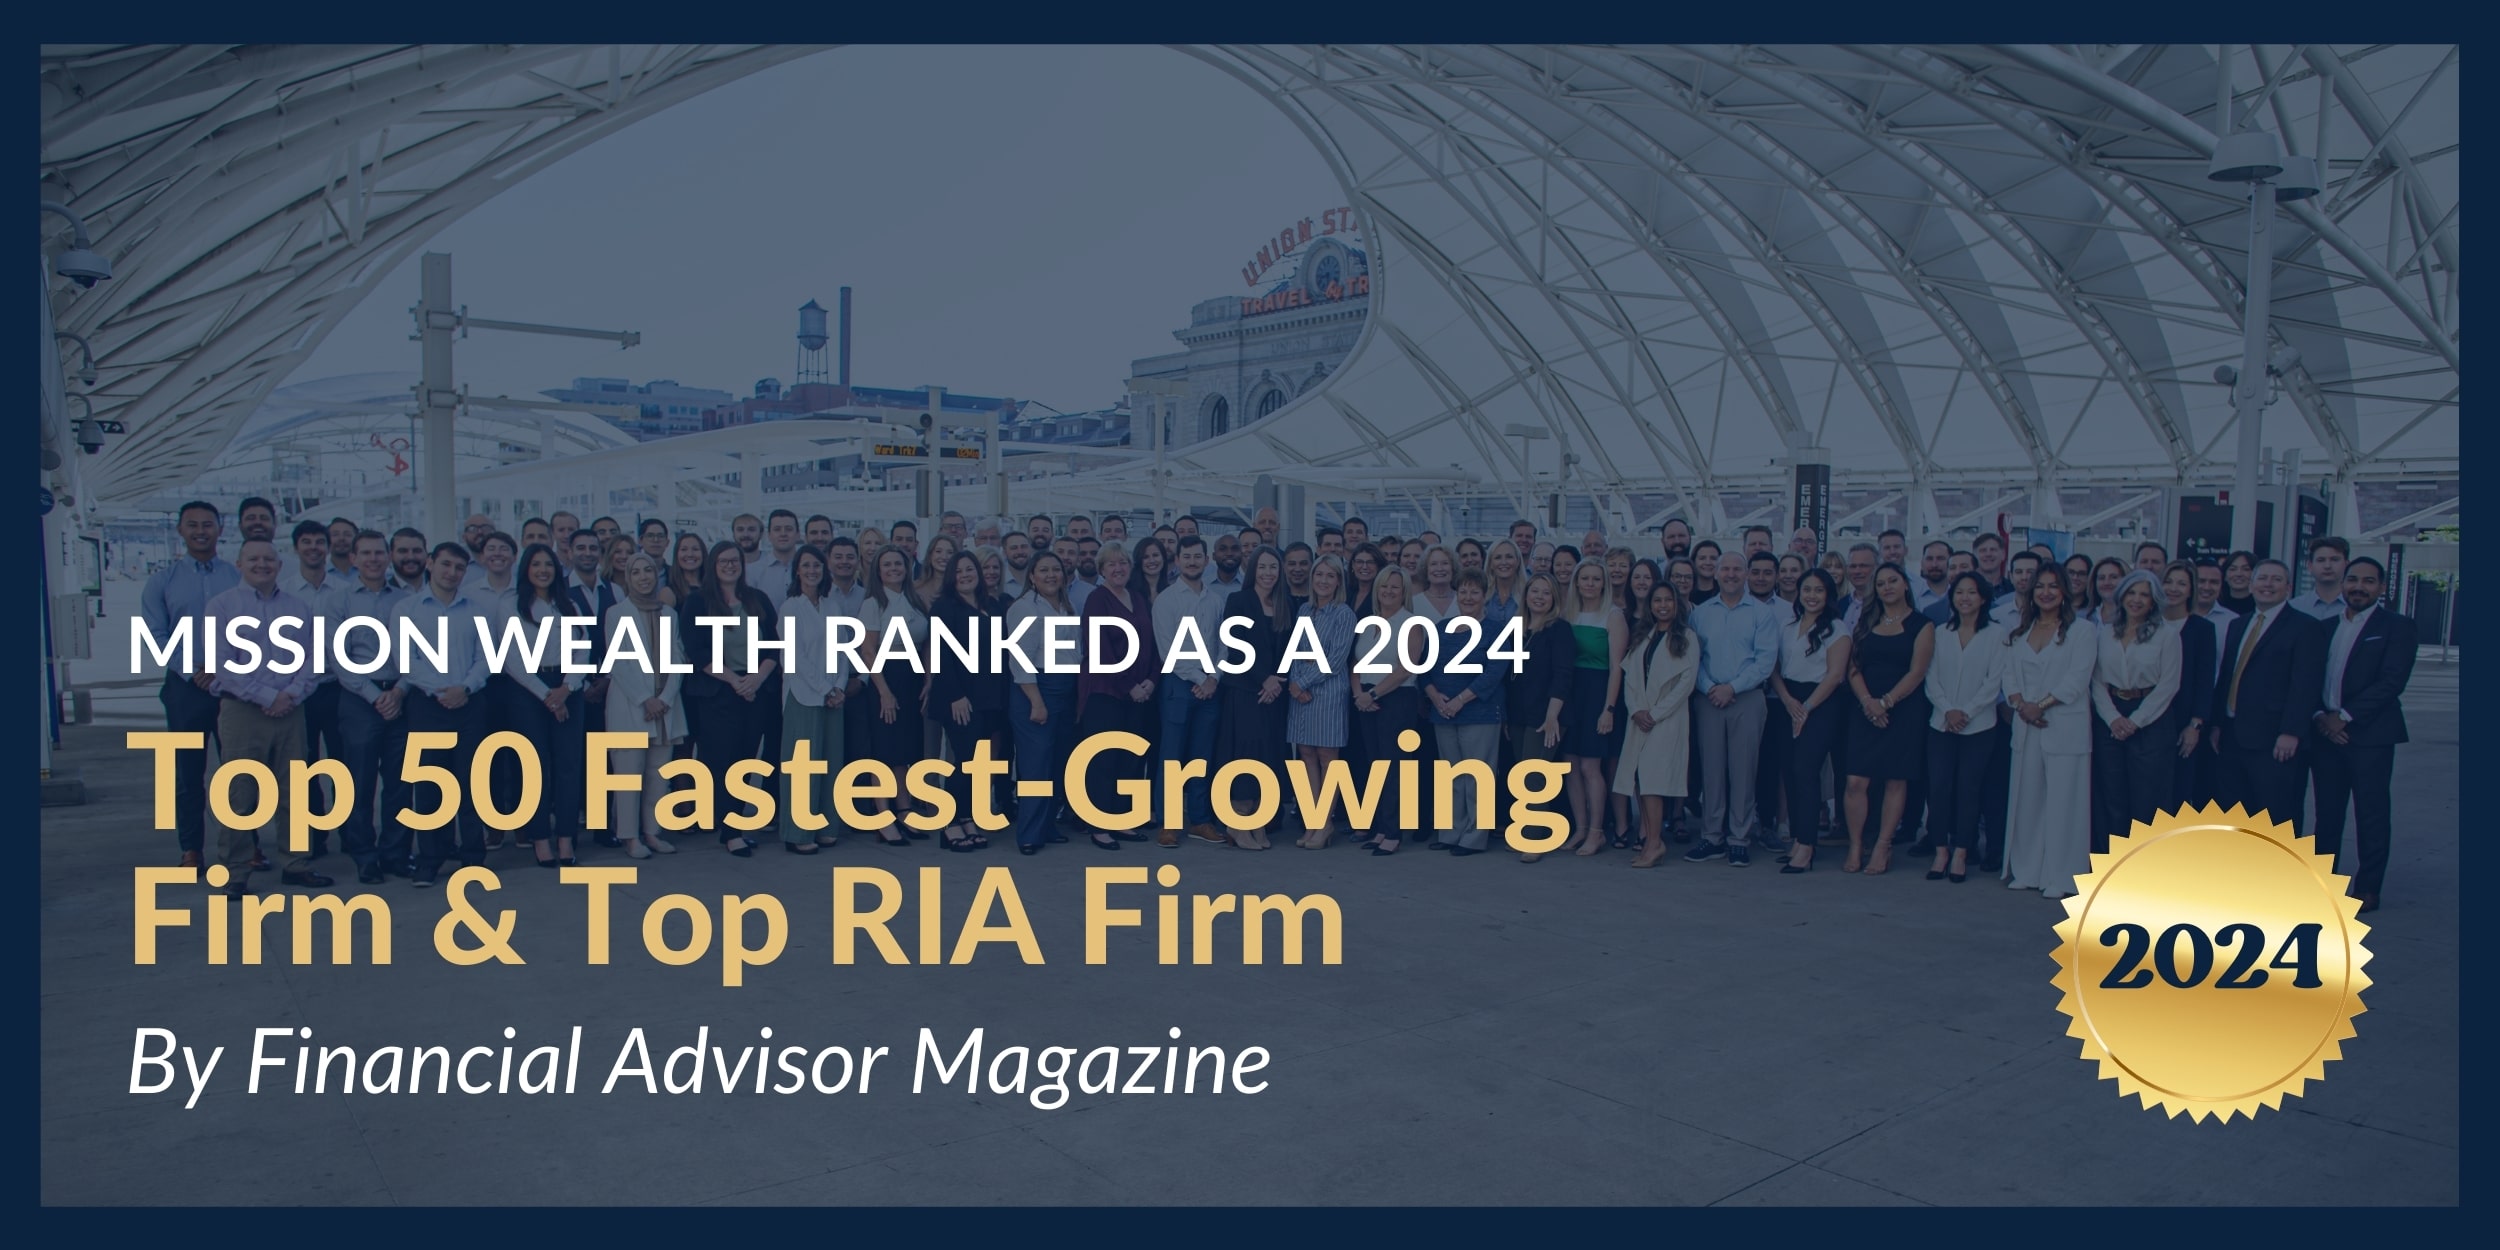 Mission Wealth is honored to be among the top RIA firms in America and the Top 50 Fastest Growing RIAs for 2024 by FA Magazine.